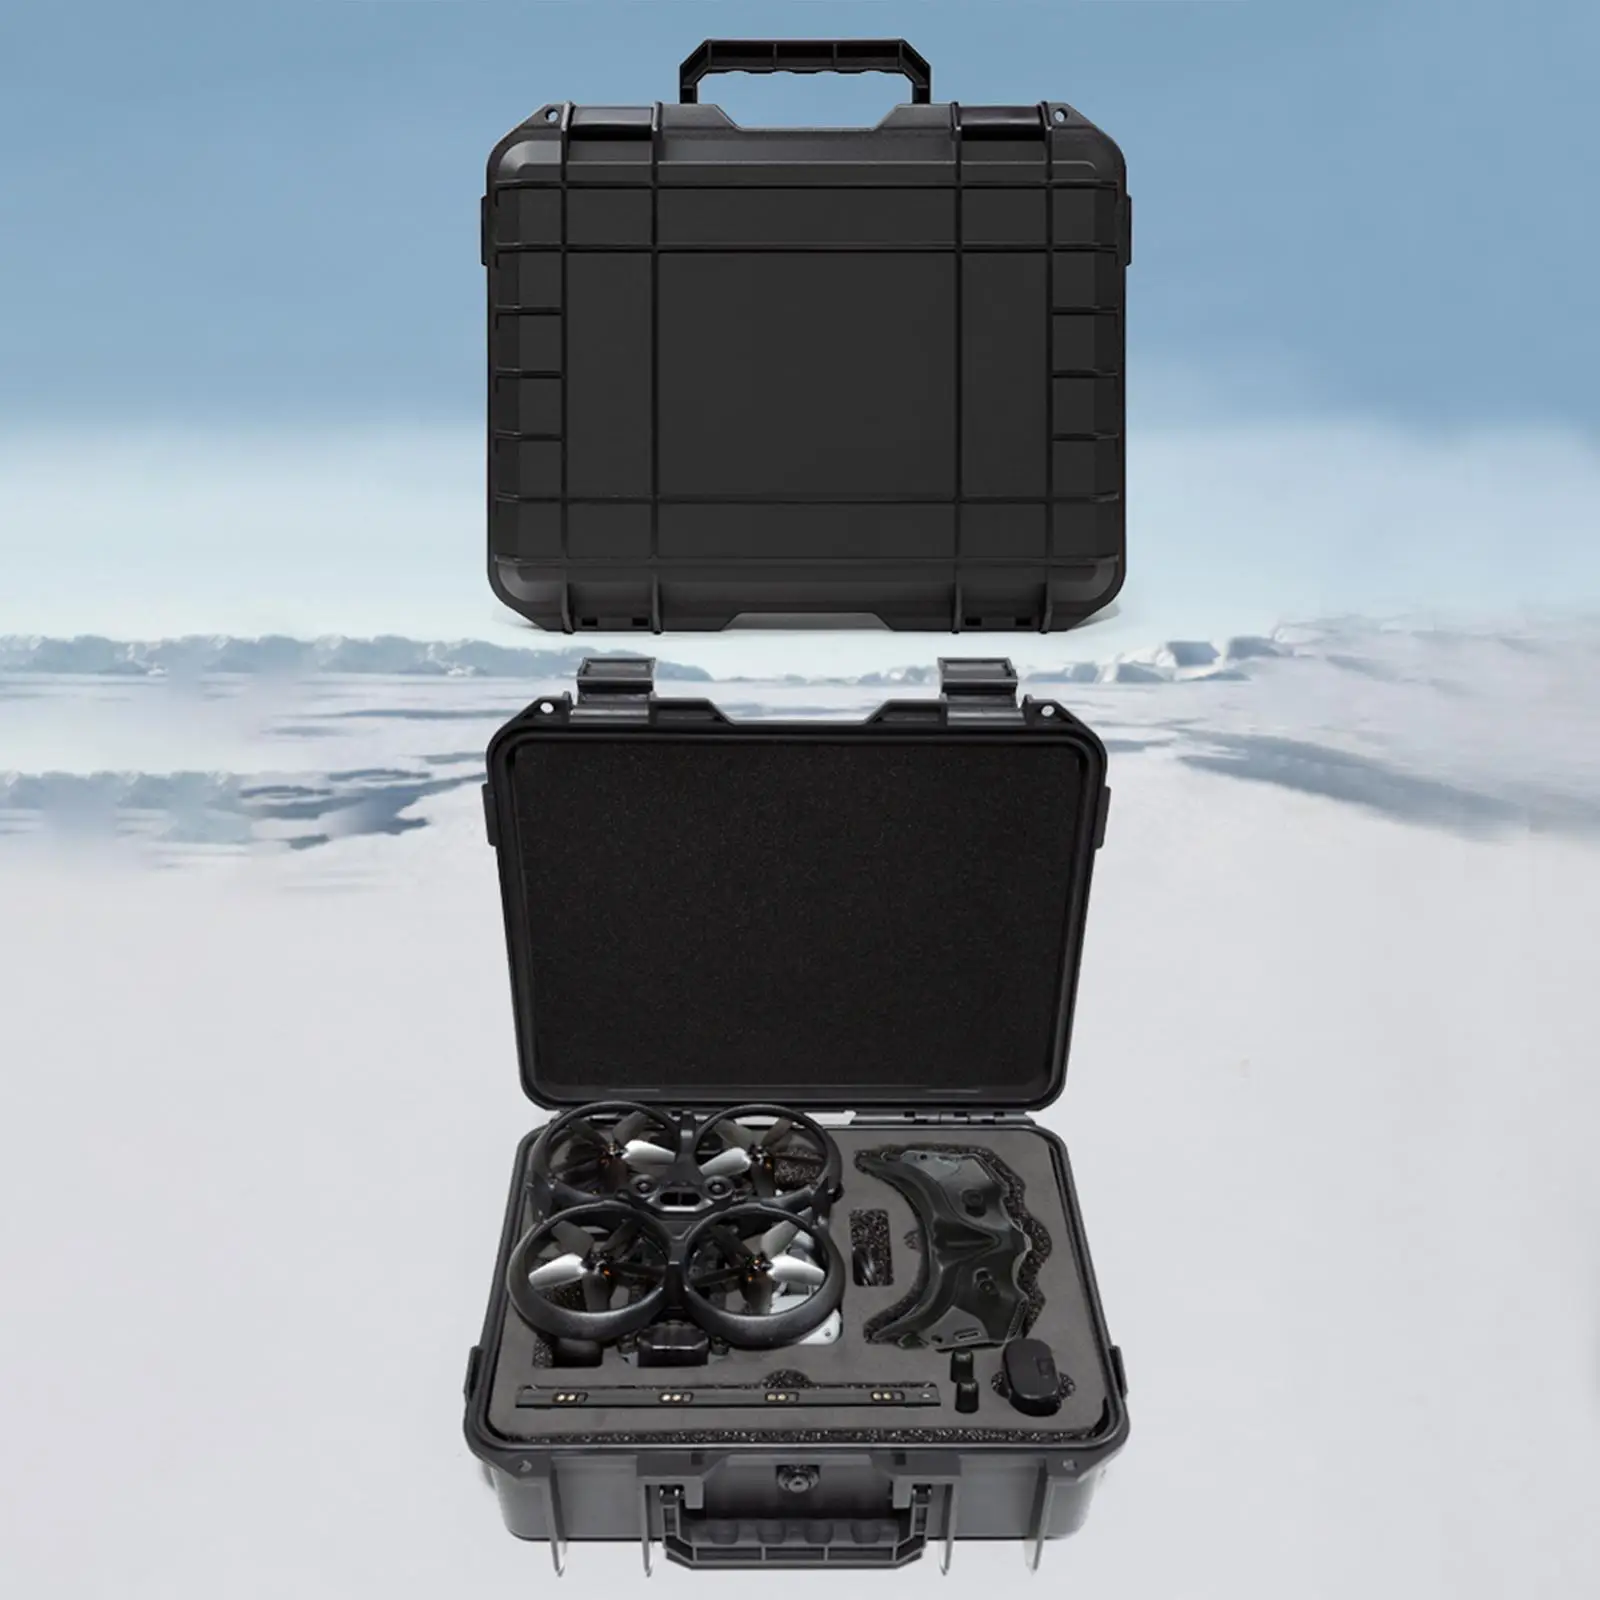 Storage Case Standard Portable Waterproof Pressure Resistant Suitcase View Combo Accessories Drone